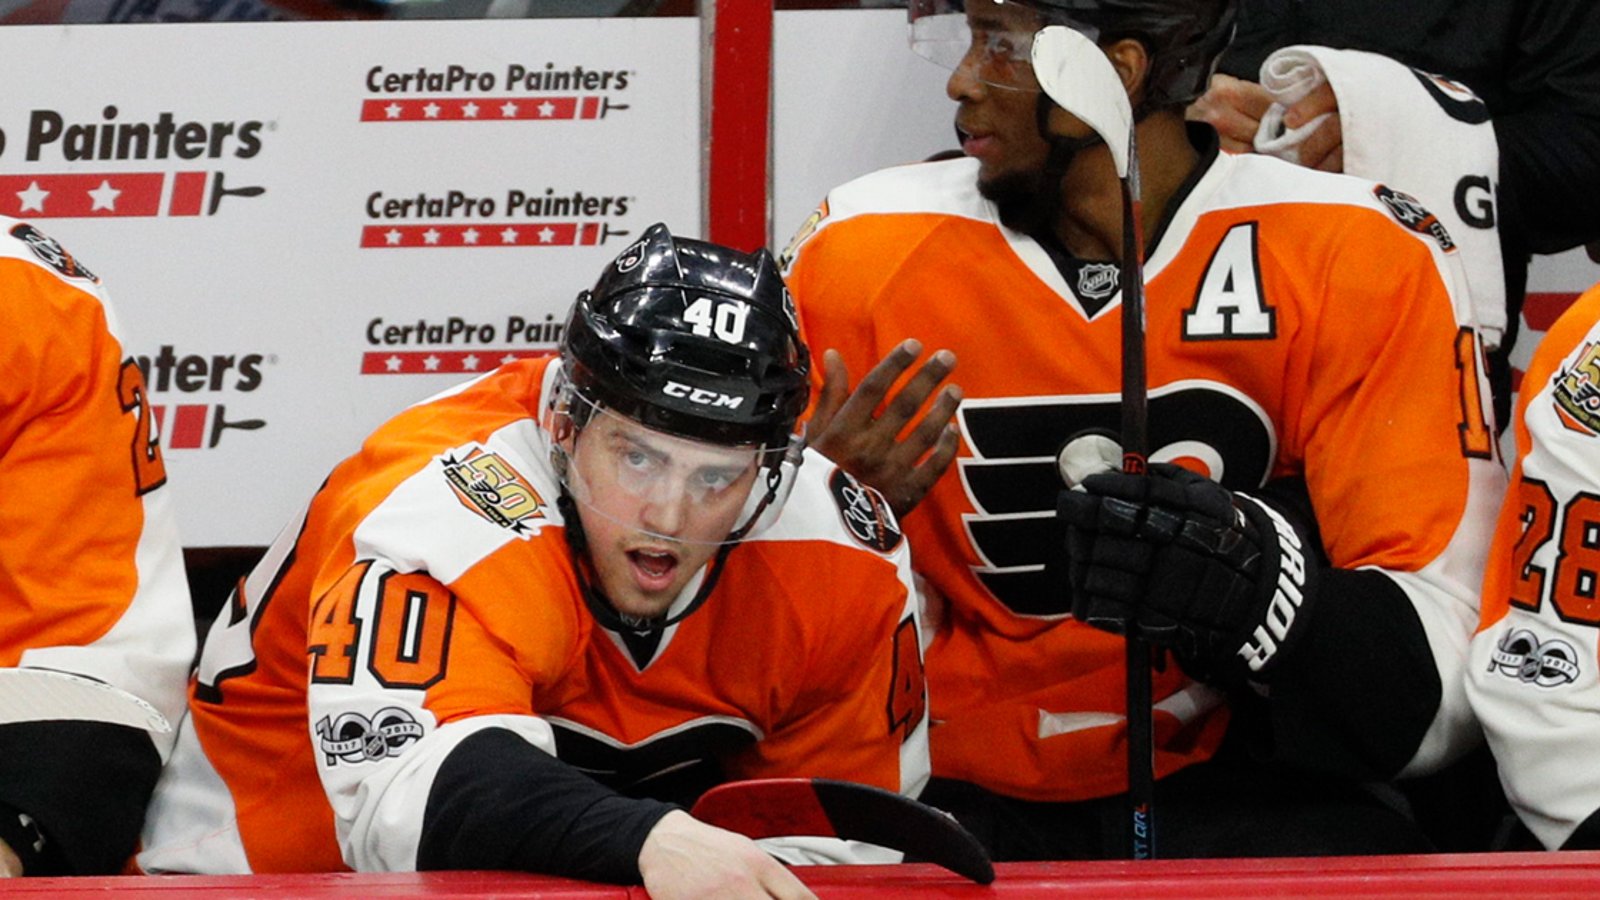 Breaking: Another Flyers player ruled out of today's game!